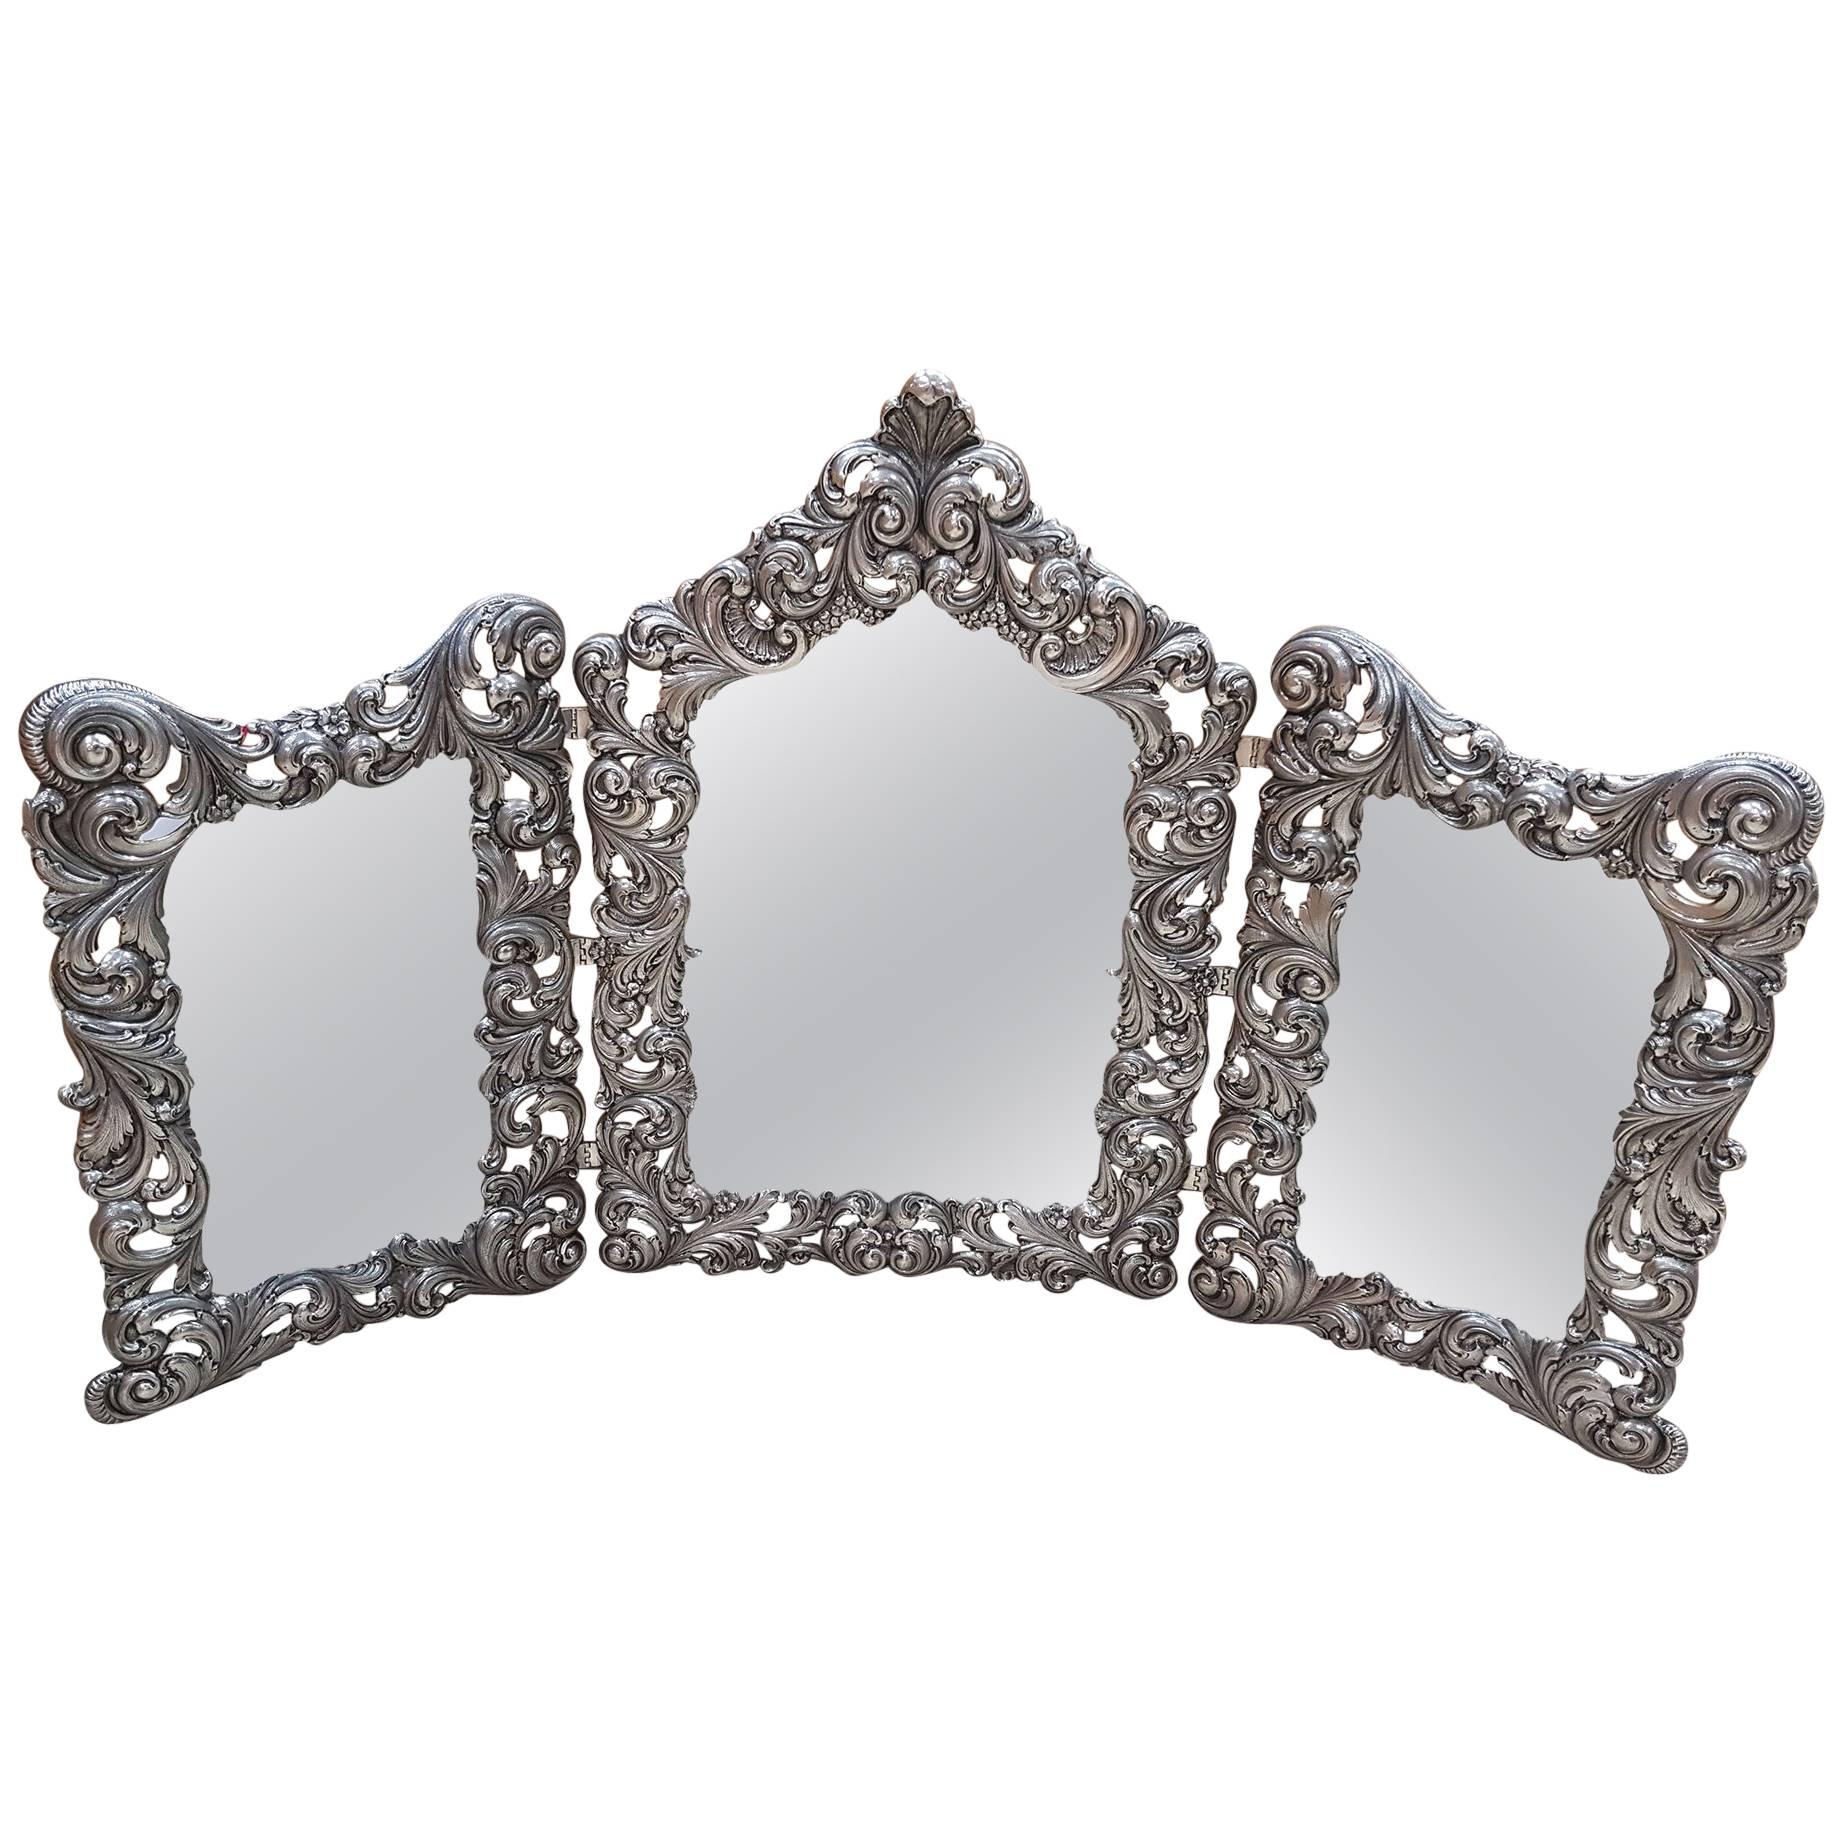 20th Century Italian Sterling Silver Handmade Triptych Mirror Baroque revival For Sale